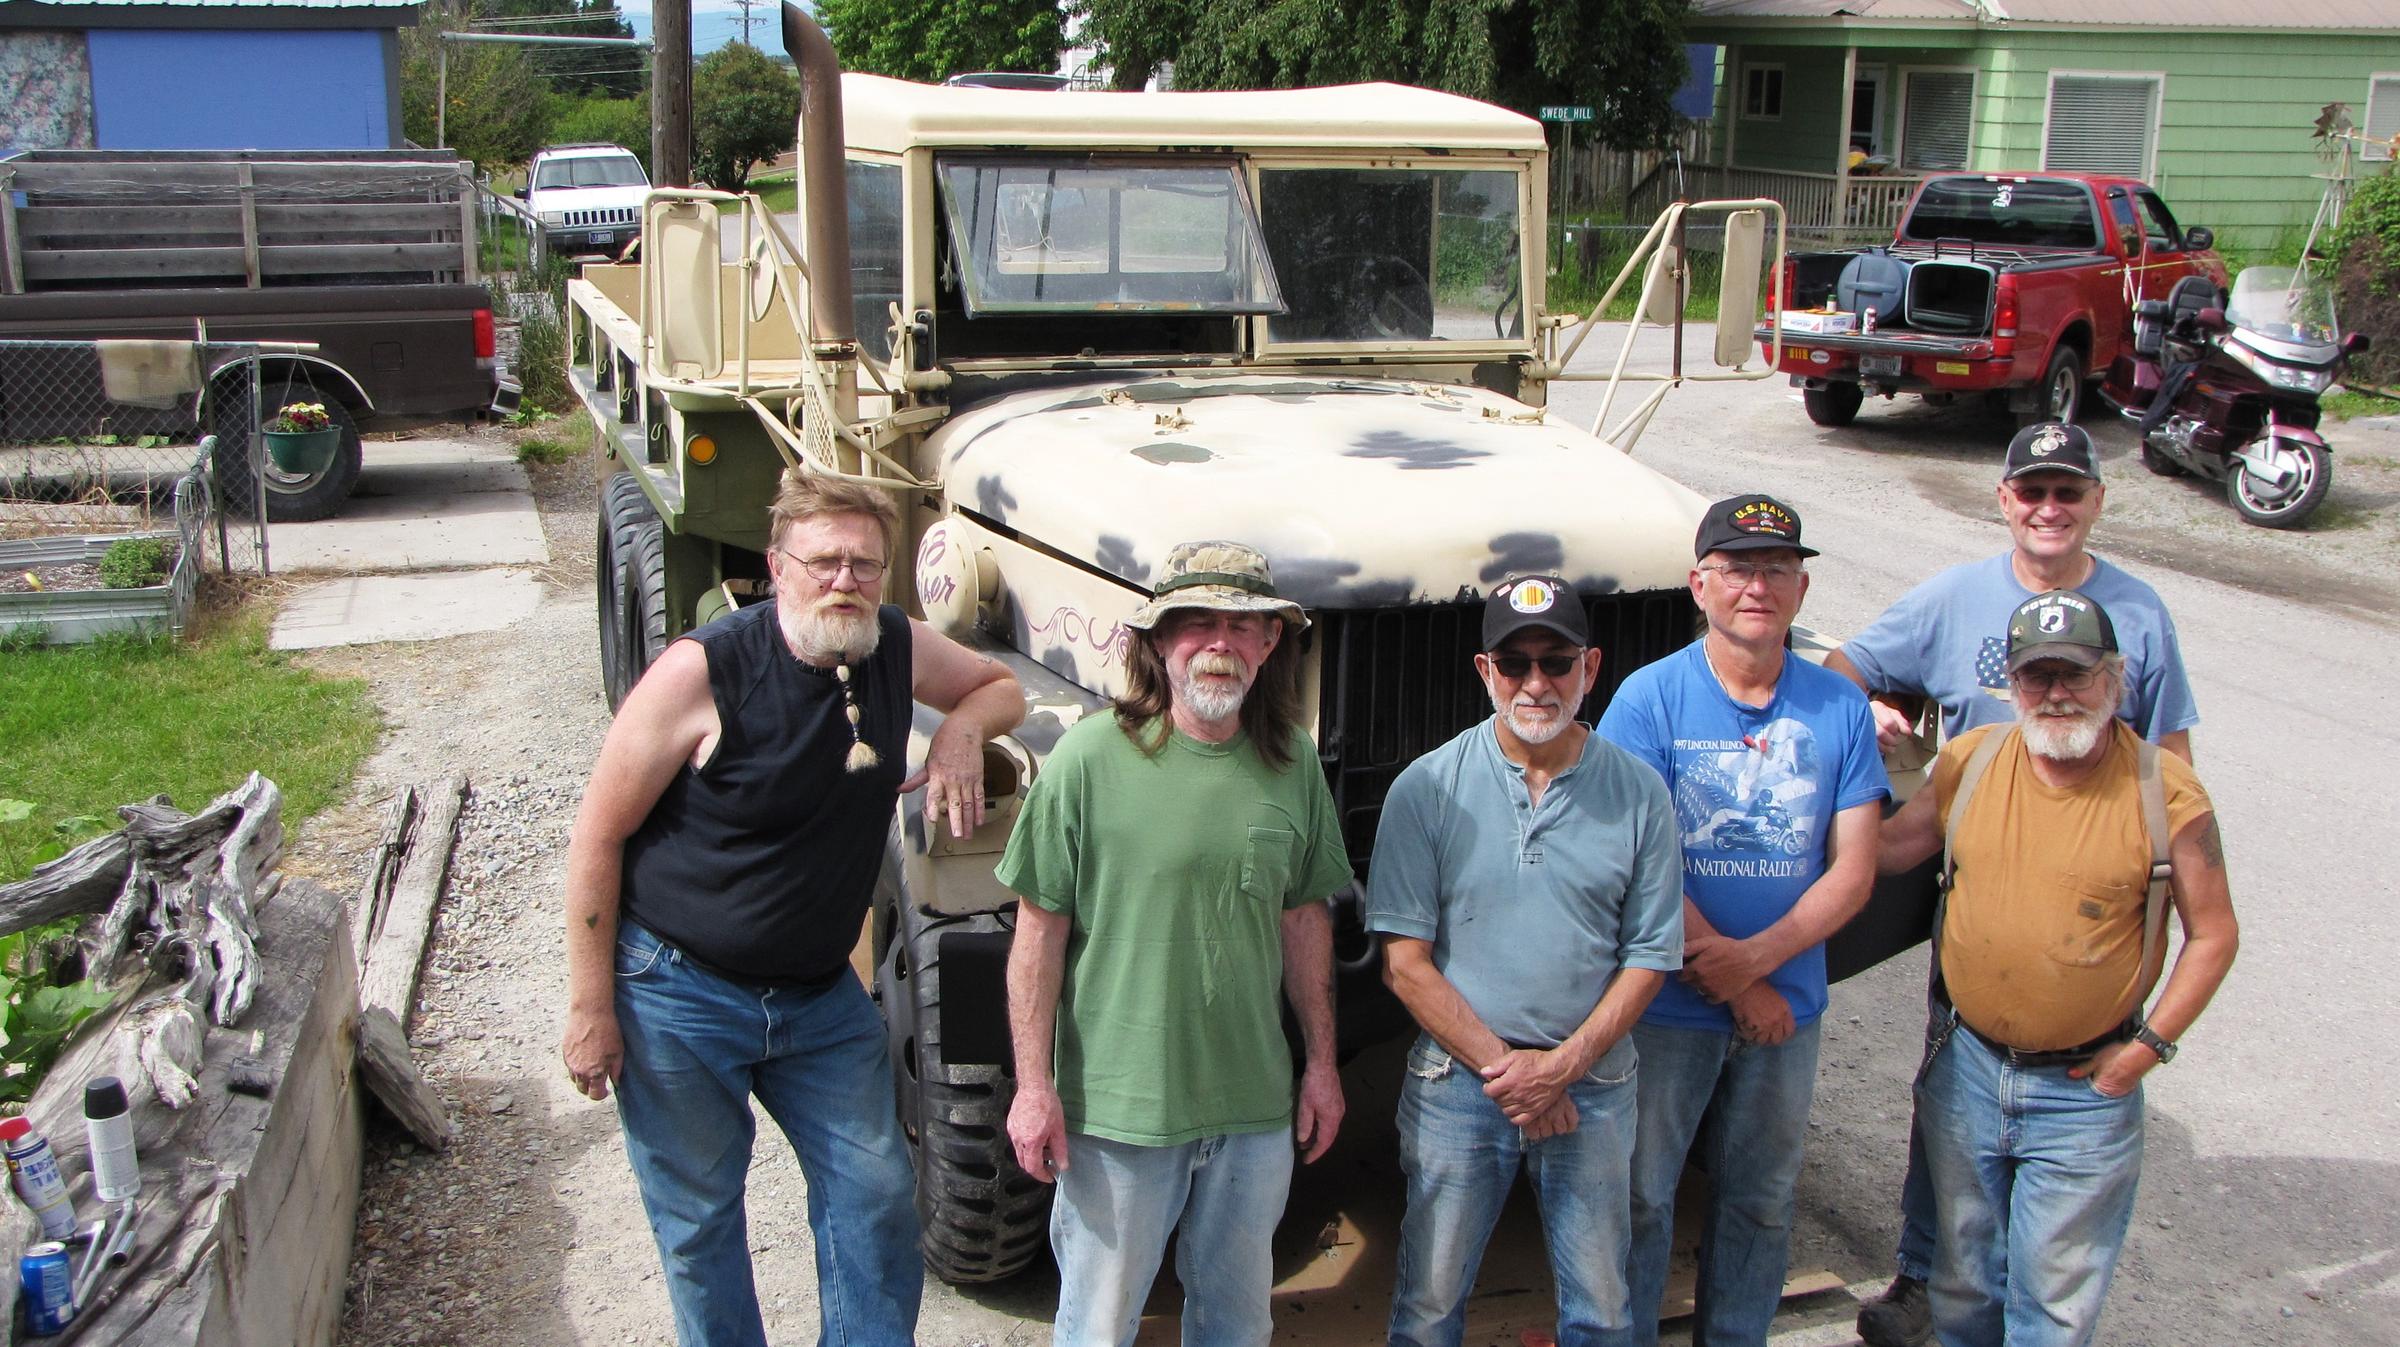 Vietnam veterans helping others out of the woods” MTPR